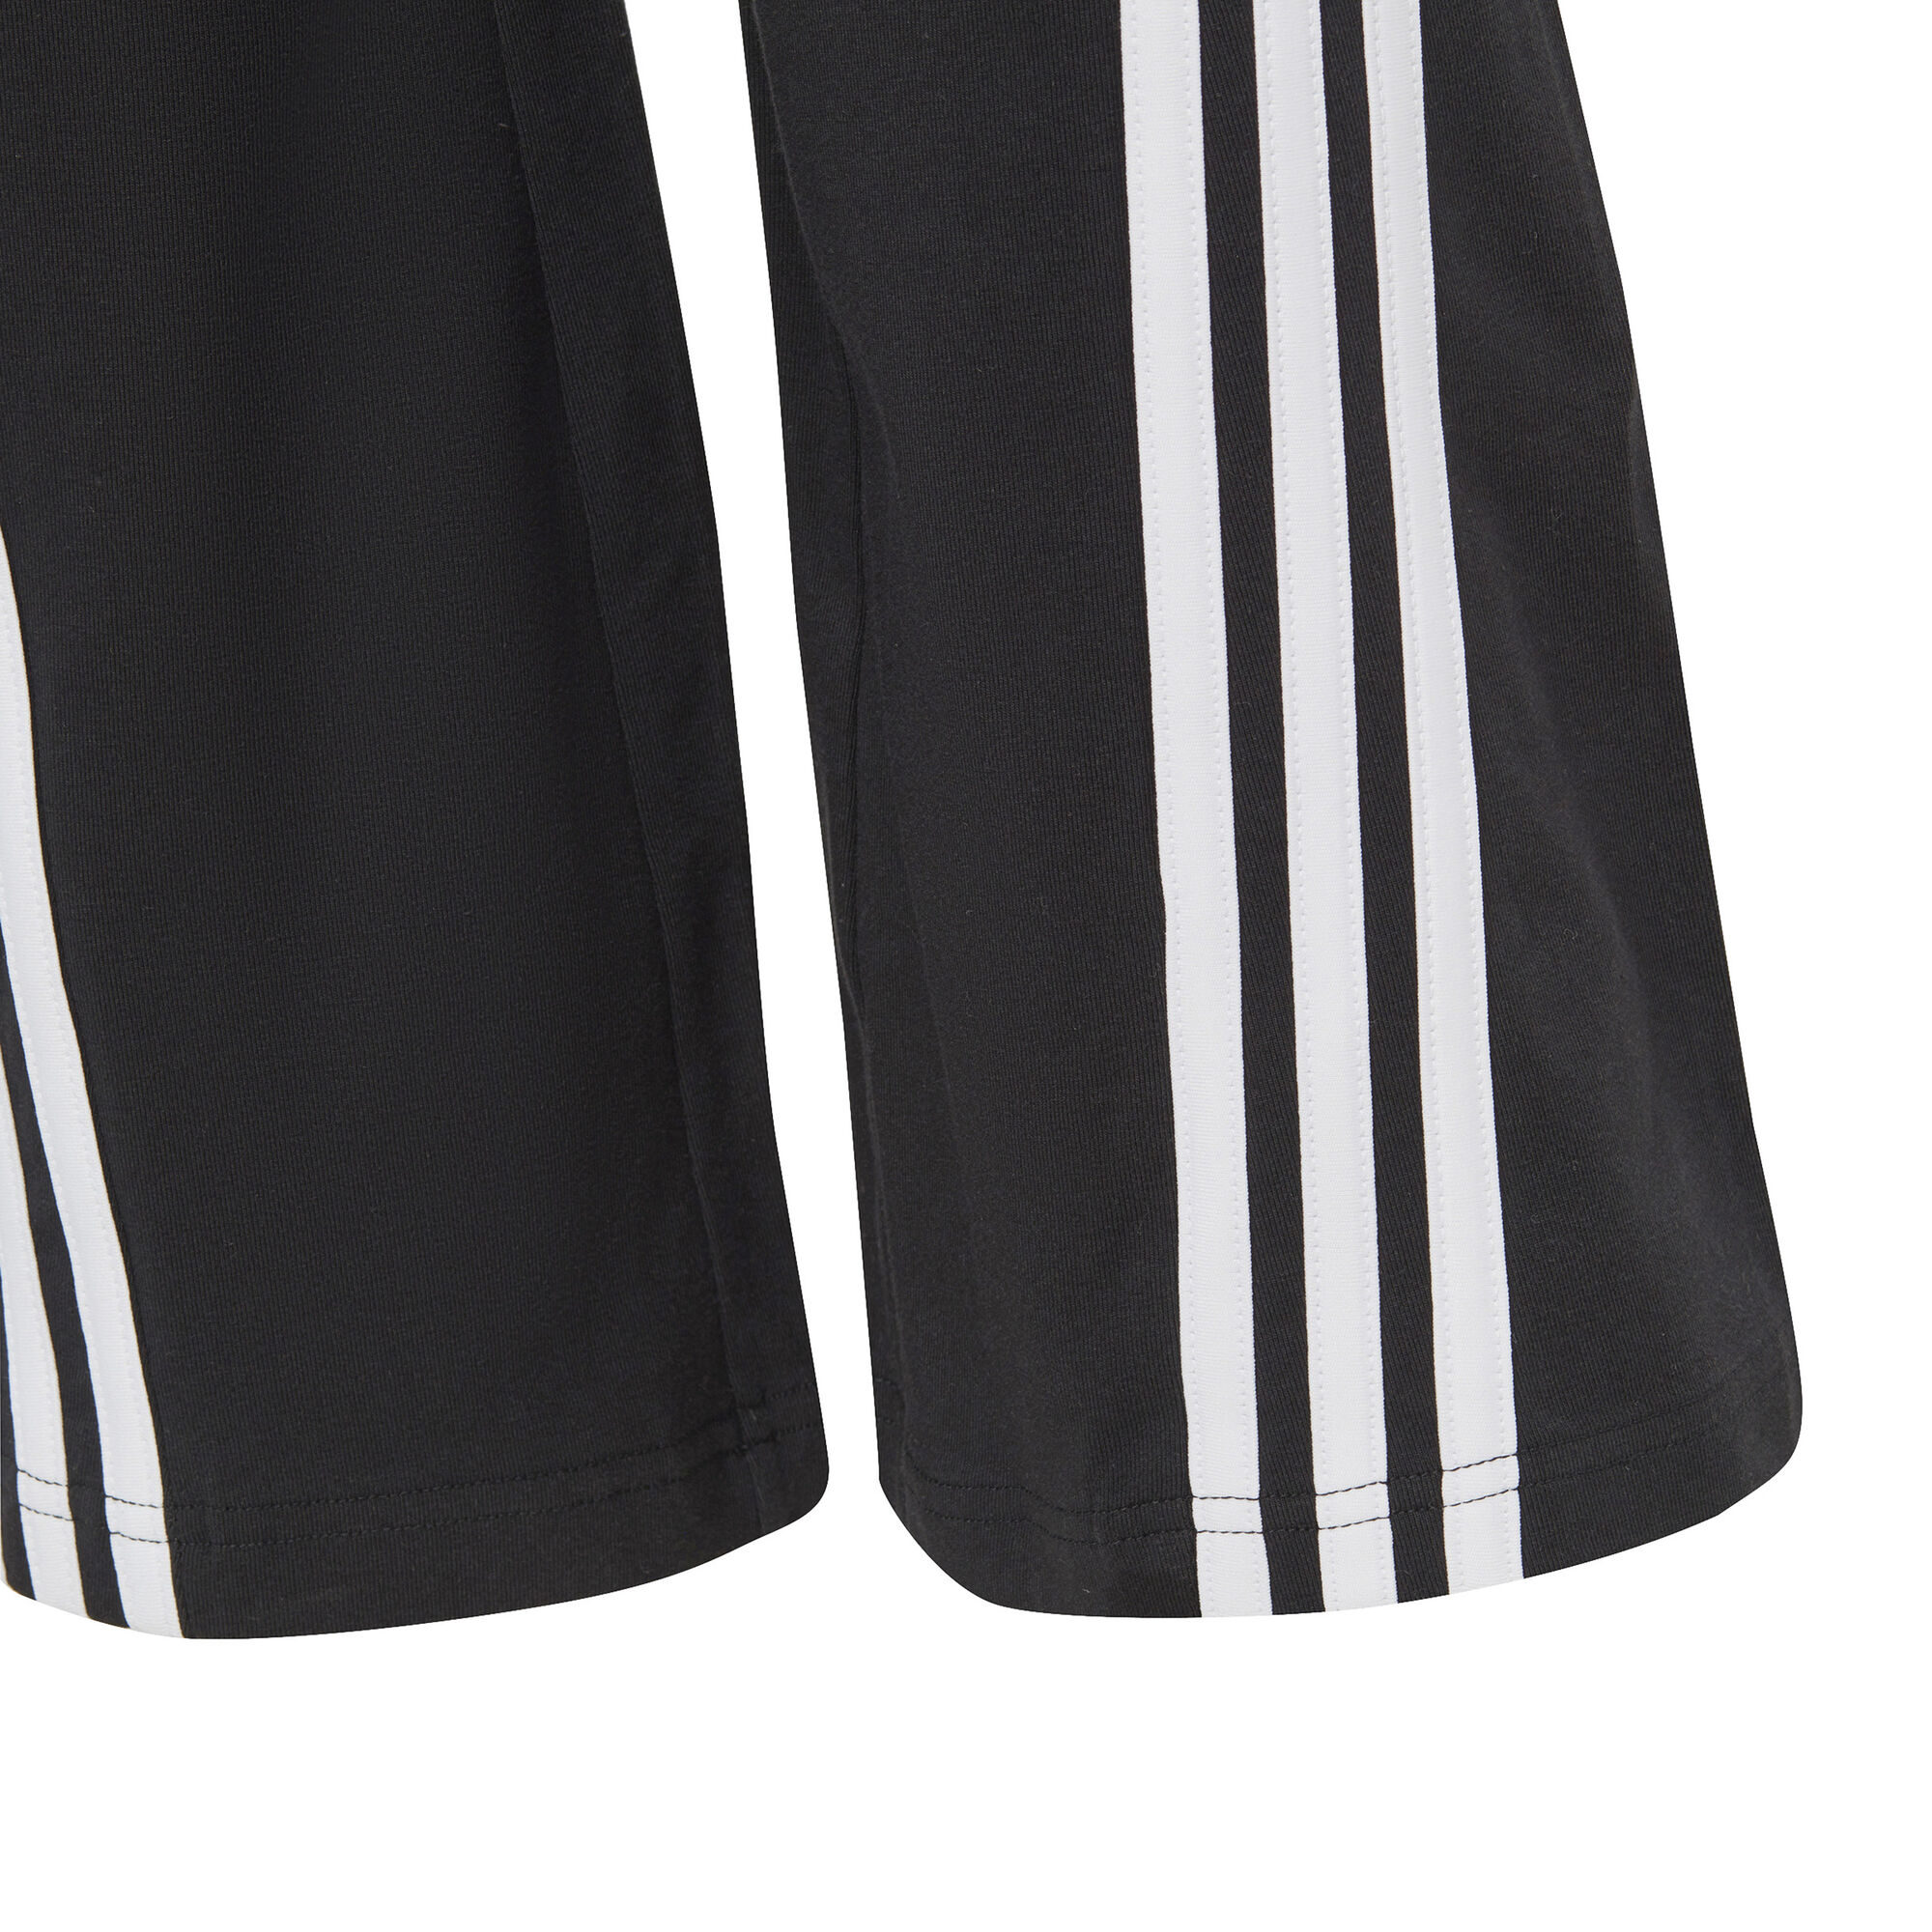 adidas Future Icons 3-Stripes Flared Chicas - Blanco compra online |